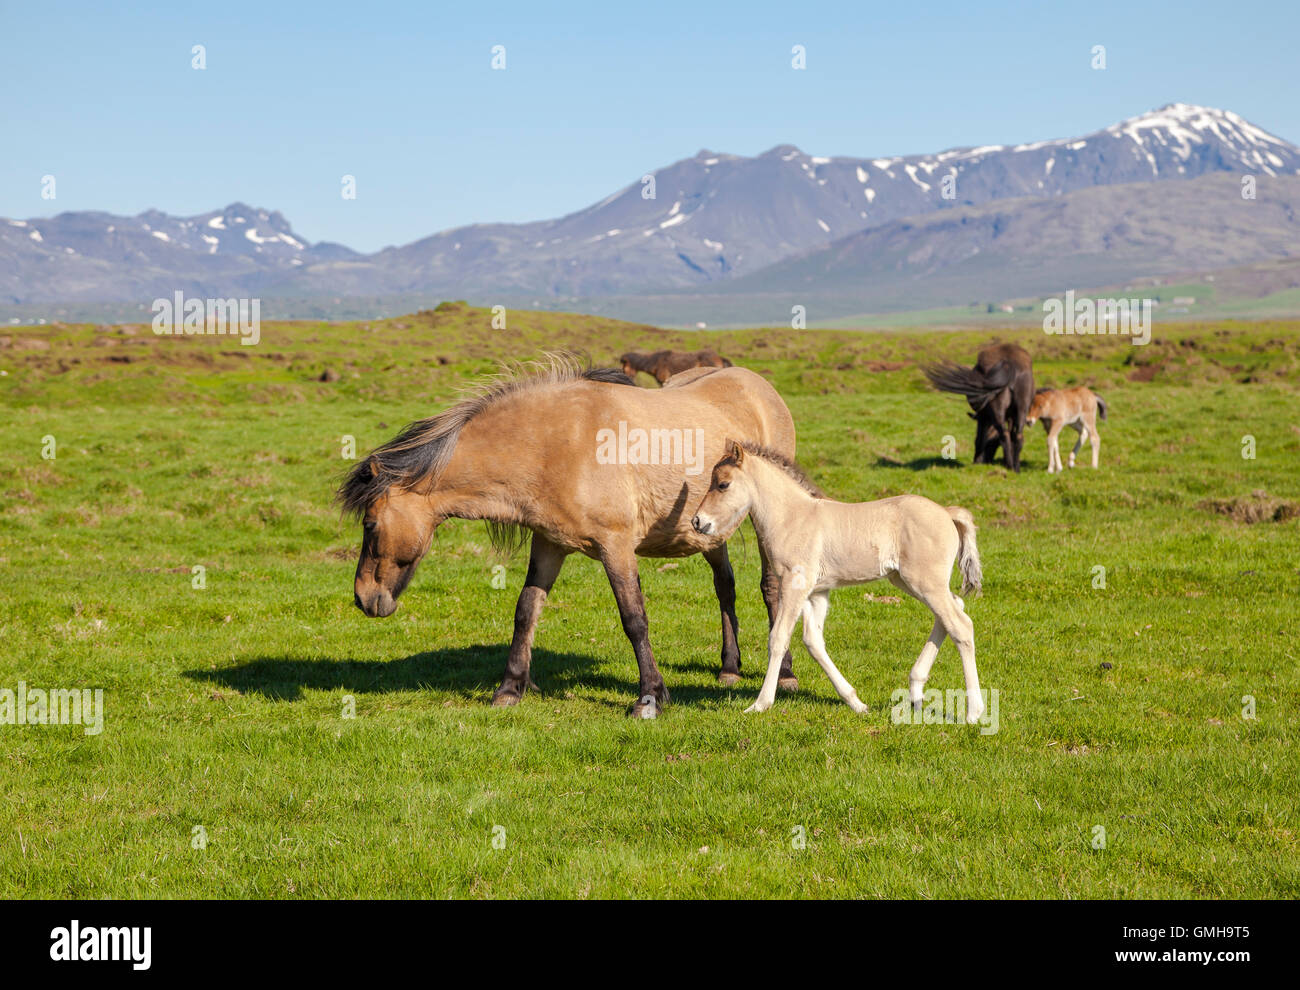 Brown horse with a foal on a green field with mountains in the background, Iceland Stock Photo